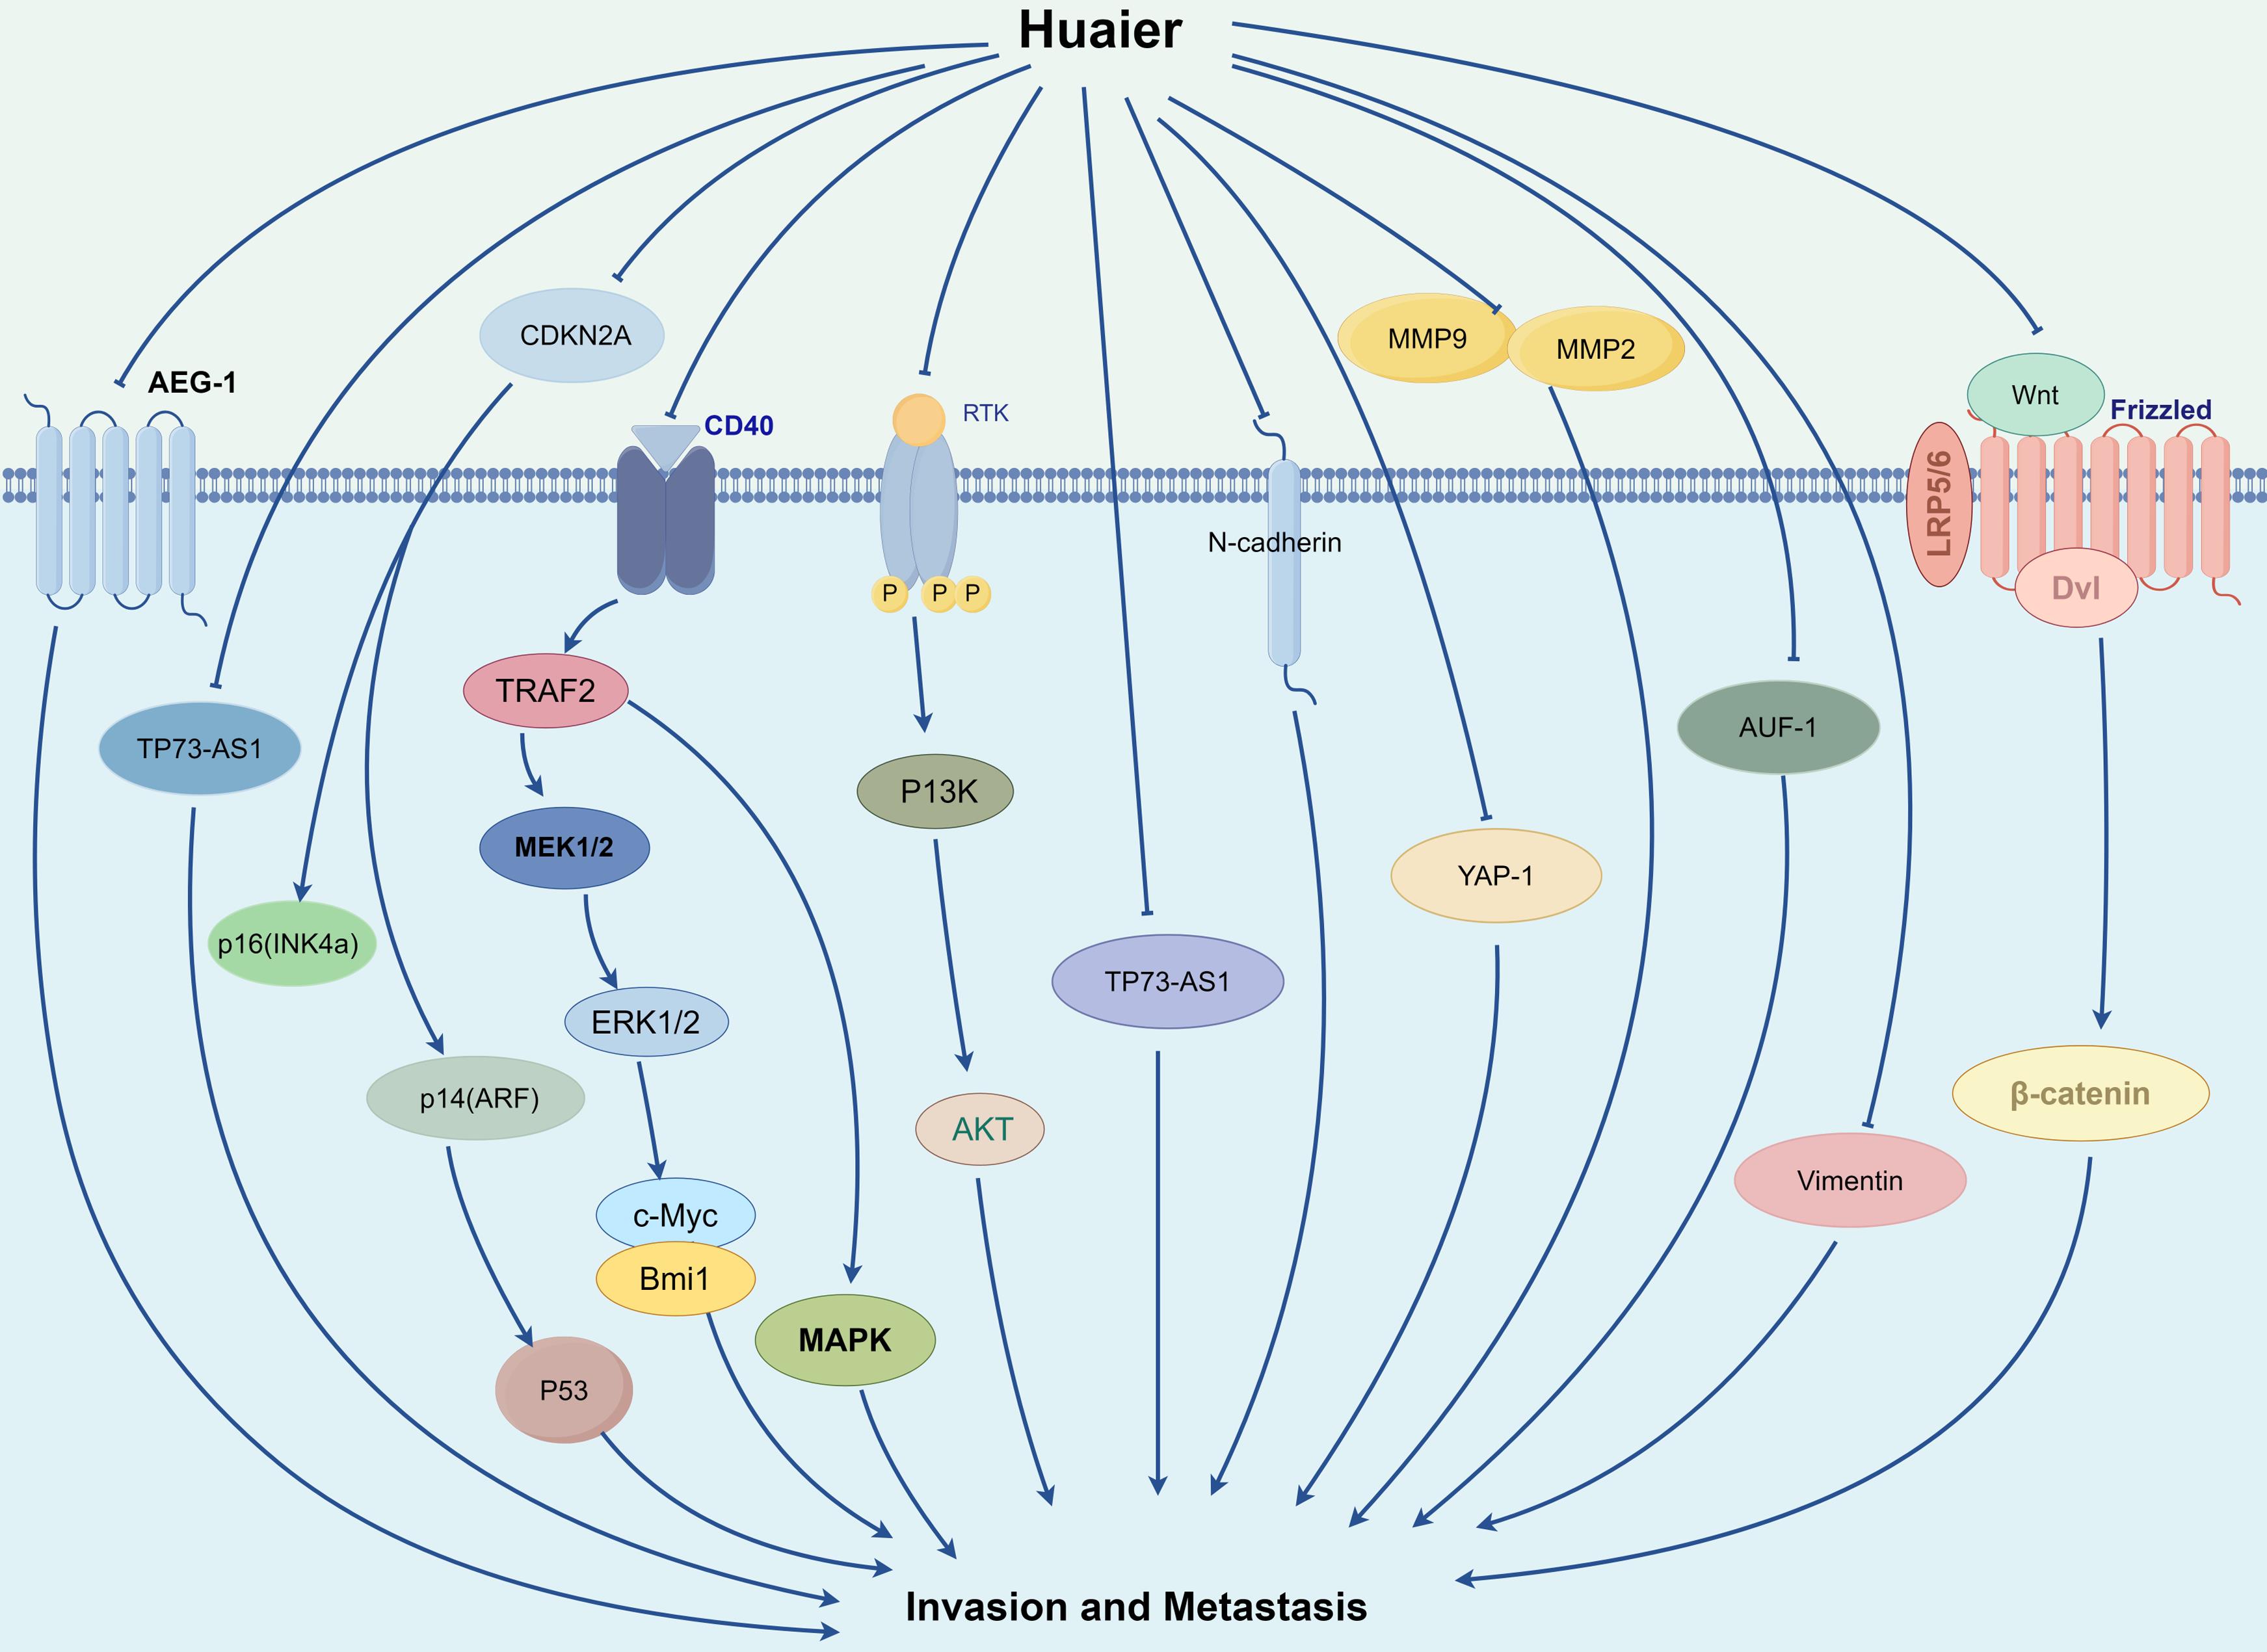 Mechanism of Huaier inhibiting cancer cell invasion and metastasis.